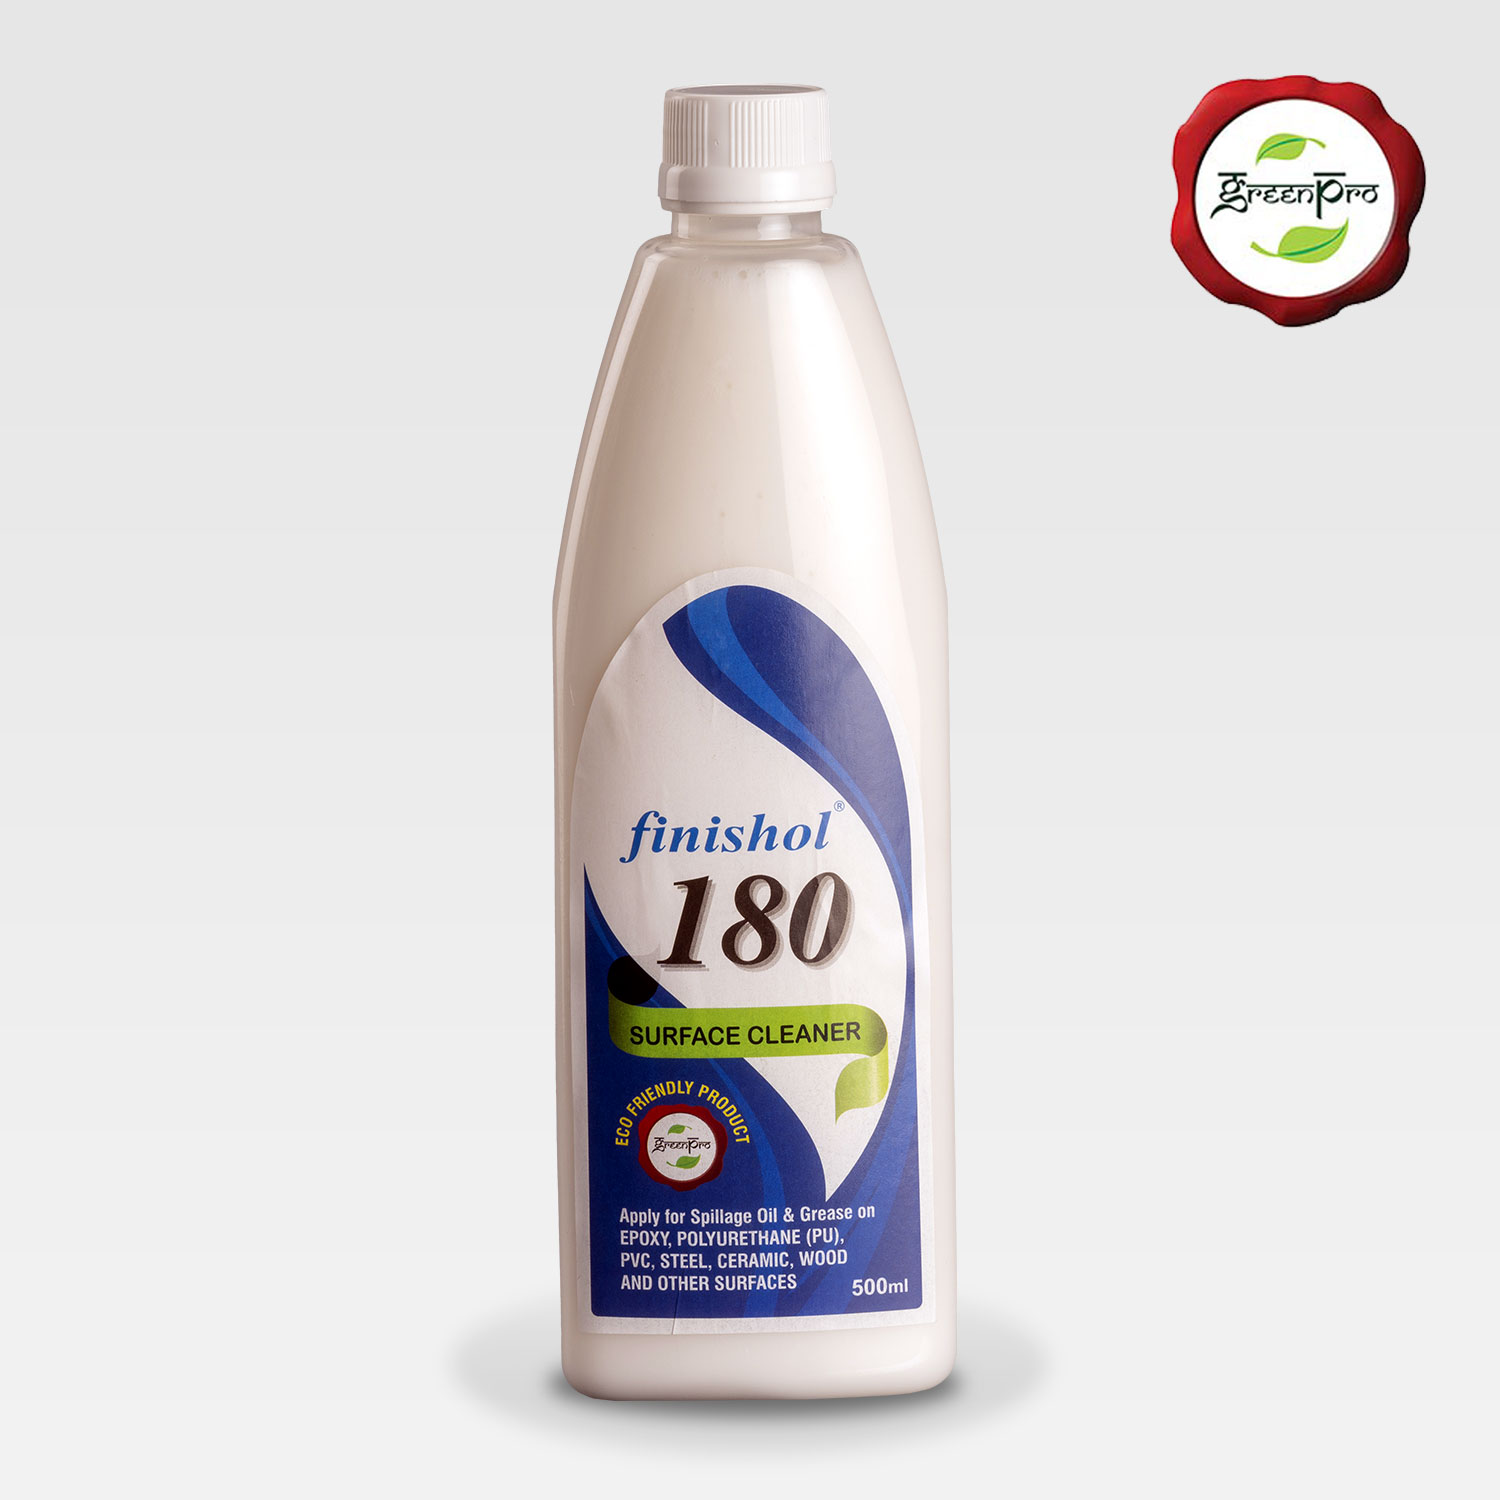 Waterless Surface Cleaner - Finishol 180